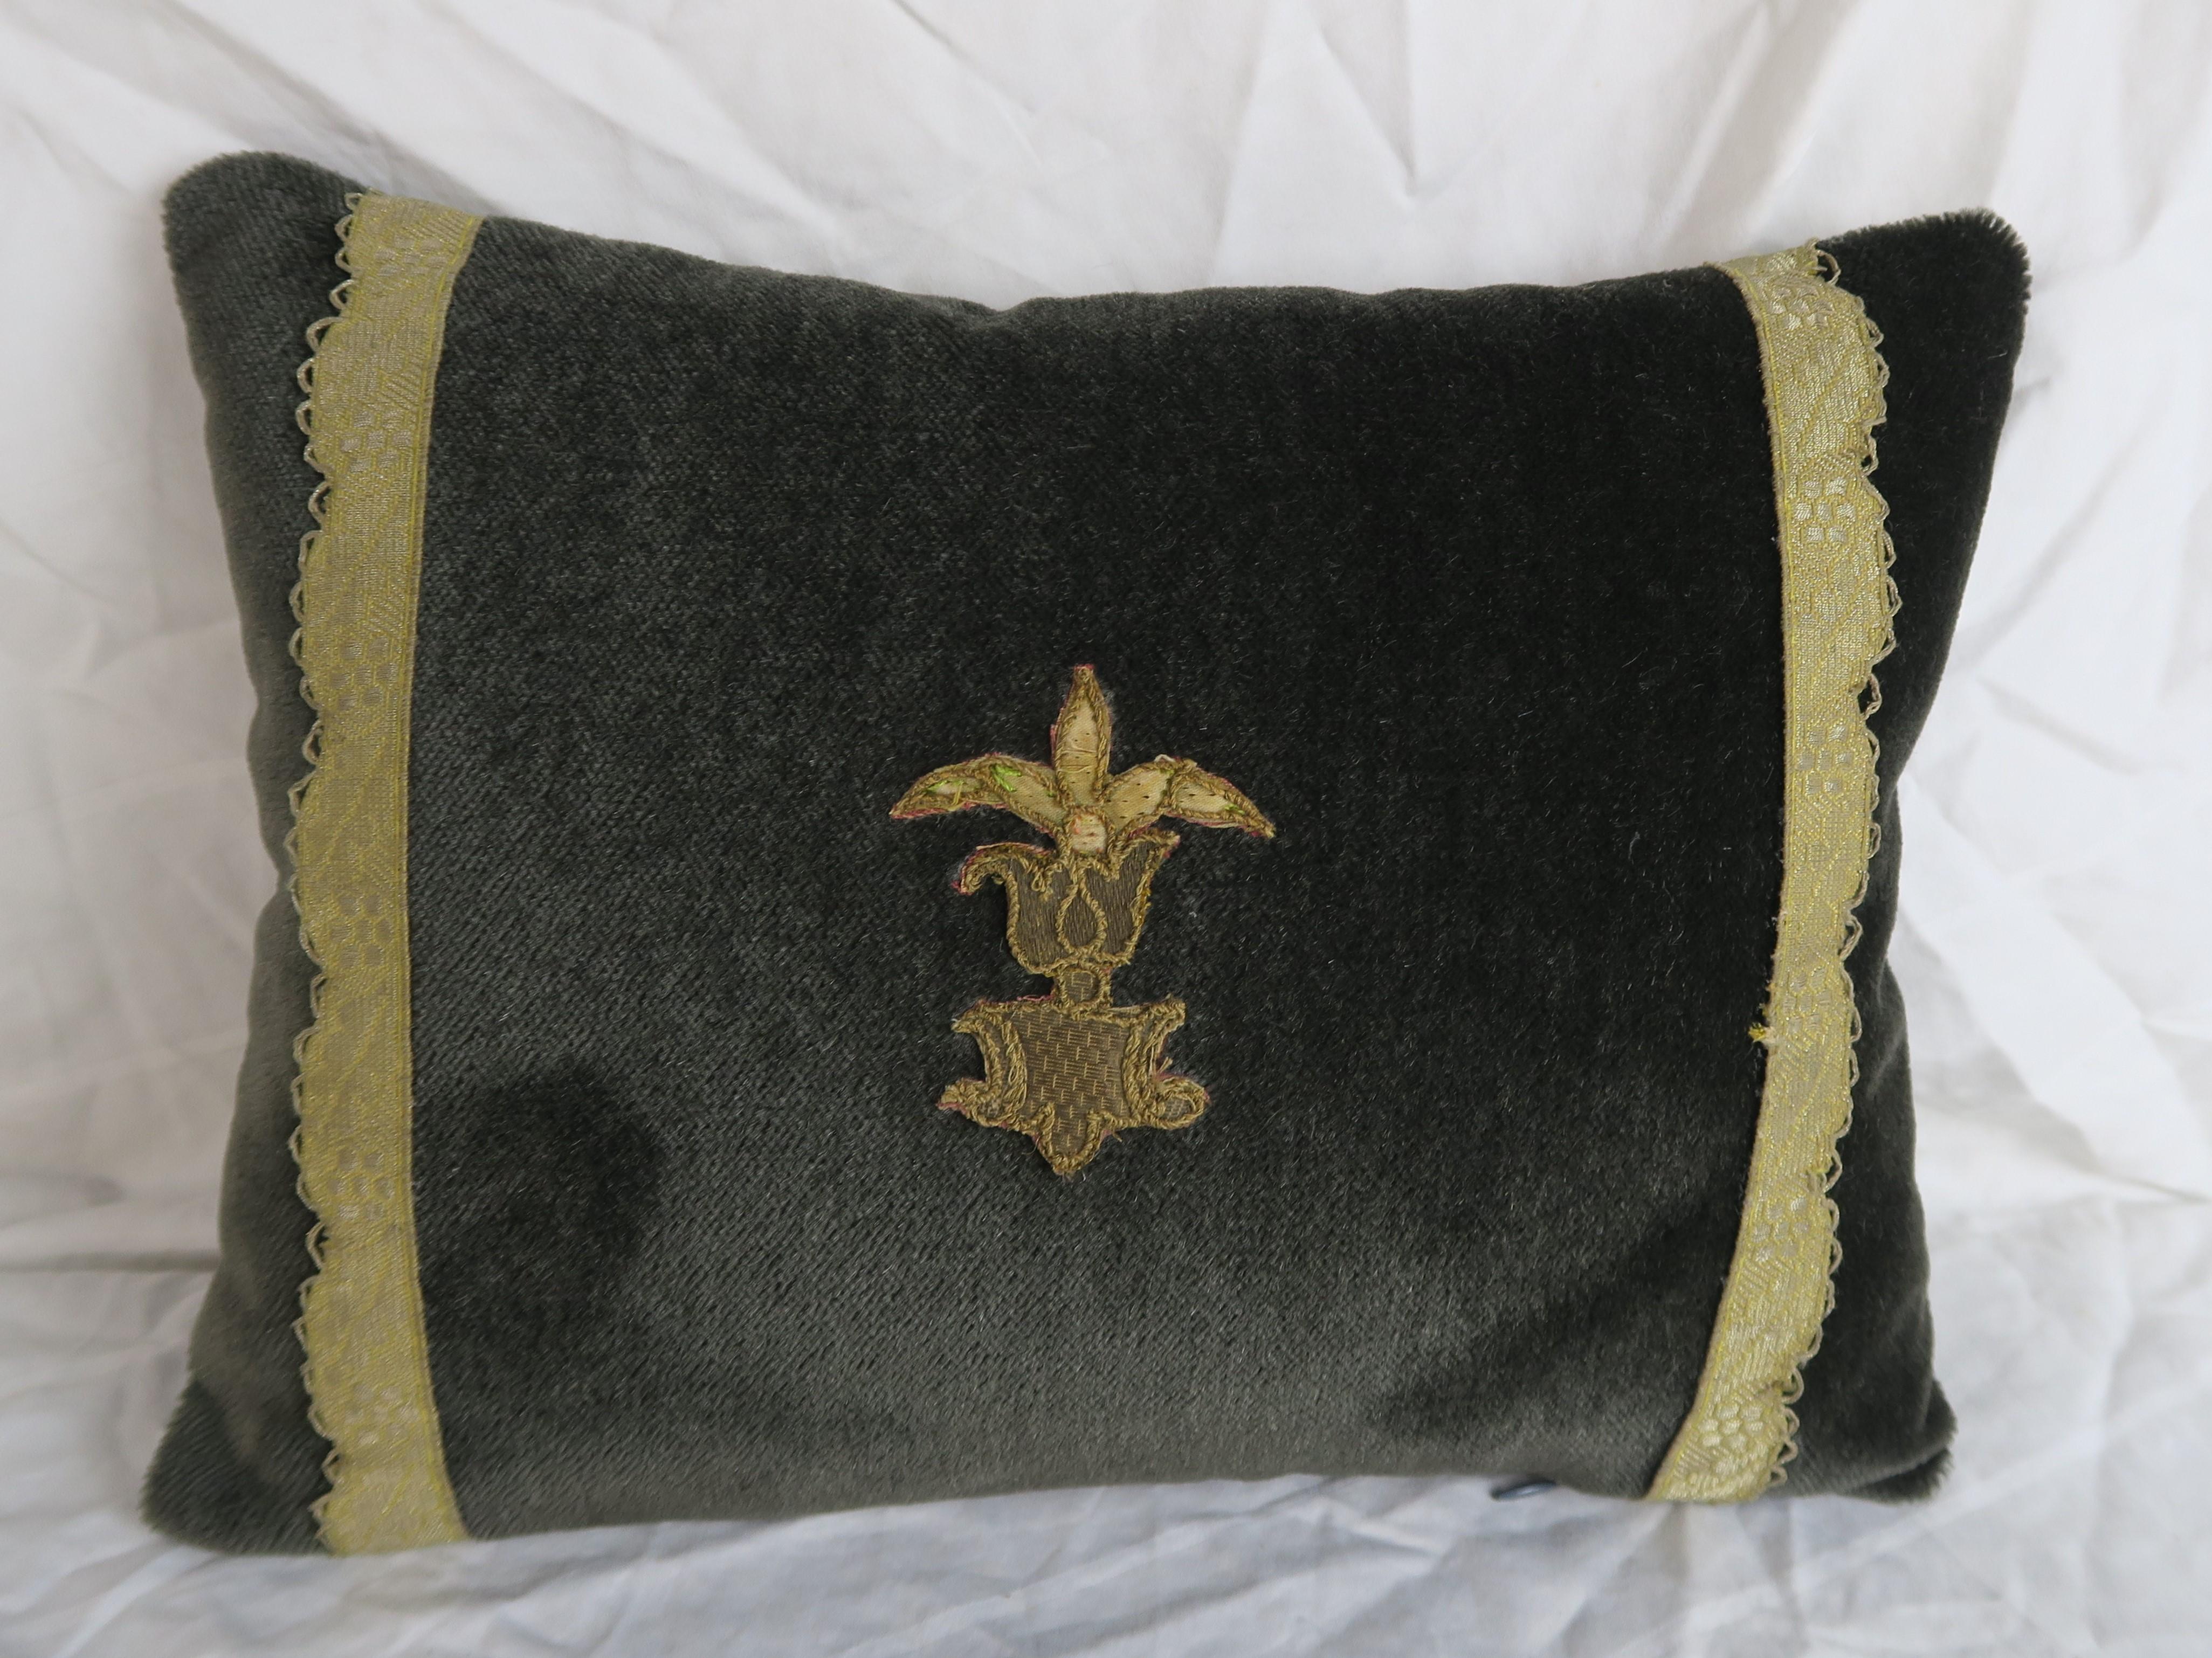 Pair of custom pillows designed by Melissa Levinson with 19th century French metallic gold and silk appliques centred on umber colored silk mohair and finished with an antique gold metallic tape at both sides of pillow. Dark gray linen backs, down